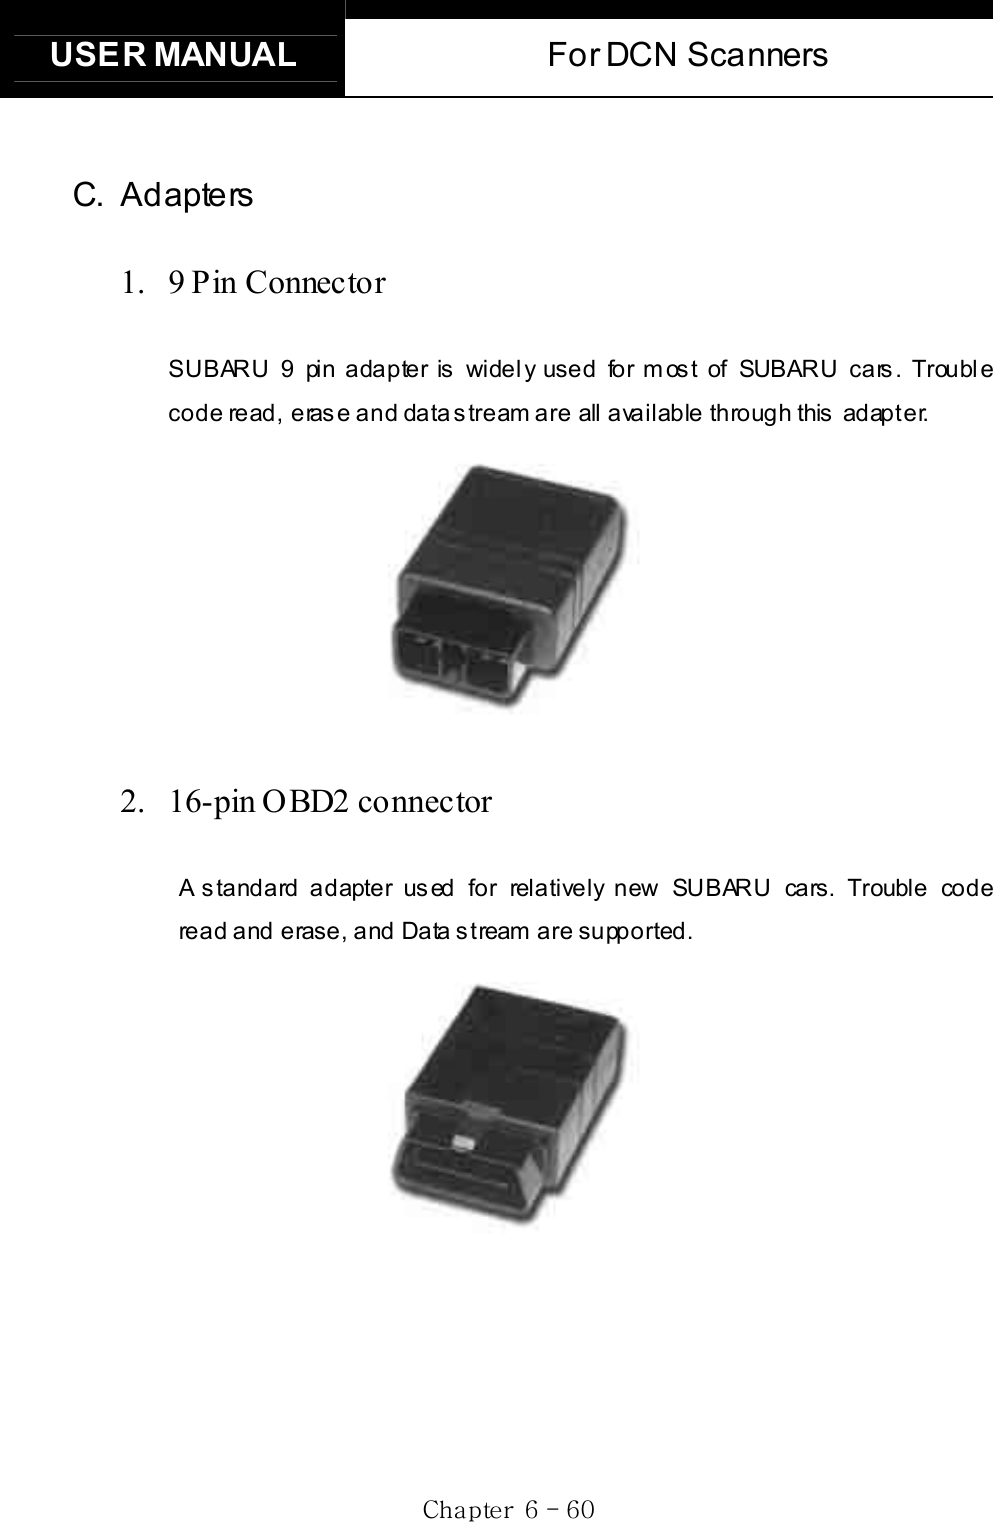 USER MANUAL  For DCN Scanners Gj G]G TG]WGC. Adapters 1. 9 Pin Connector SUBARU 9 pin adapter is widely used for most of SUBARU cars. Trouble code  read,  erase and  data stream are all available through this  adapter. 2.  16-pin OBD2 connectorA standard adapter used for relatively new SUBARU cars. Trouble code read and erase, and Data stream are supported. 